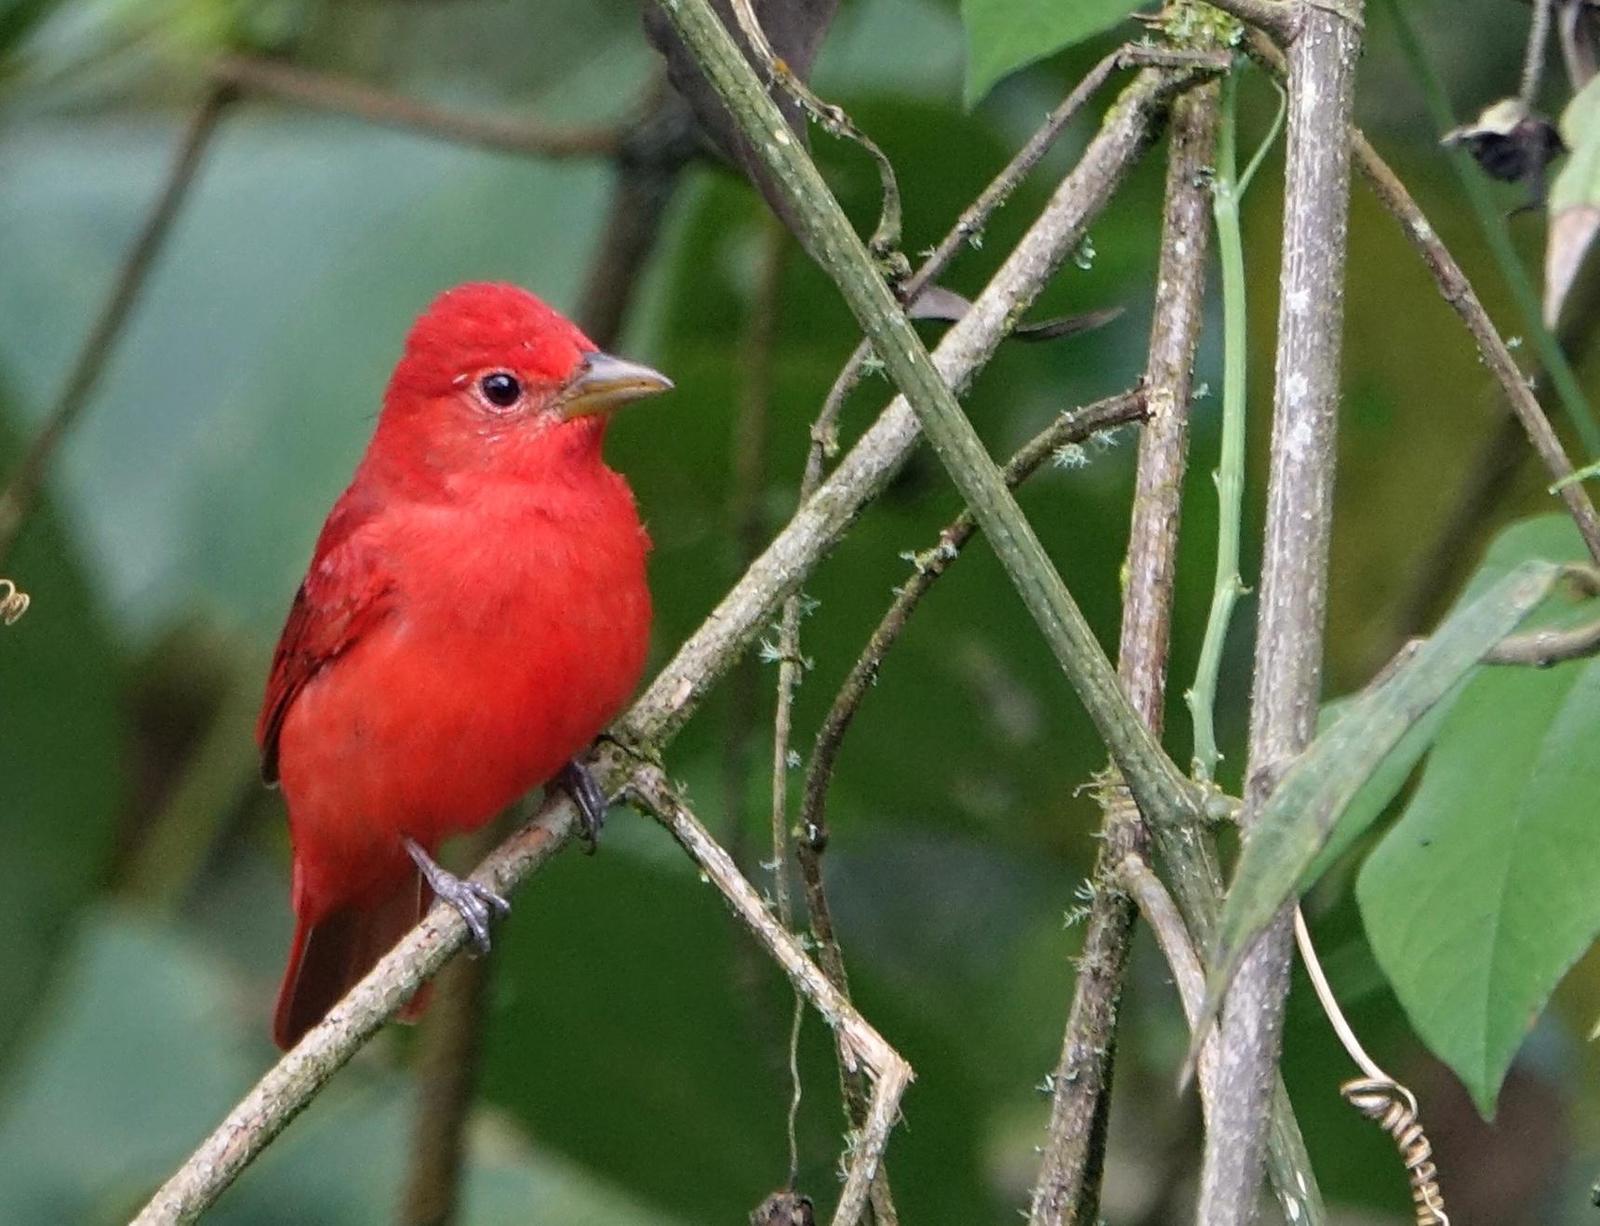 Summer Tanager Photo by Doug Swartz